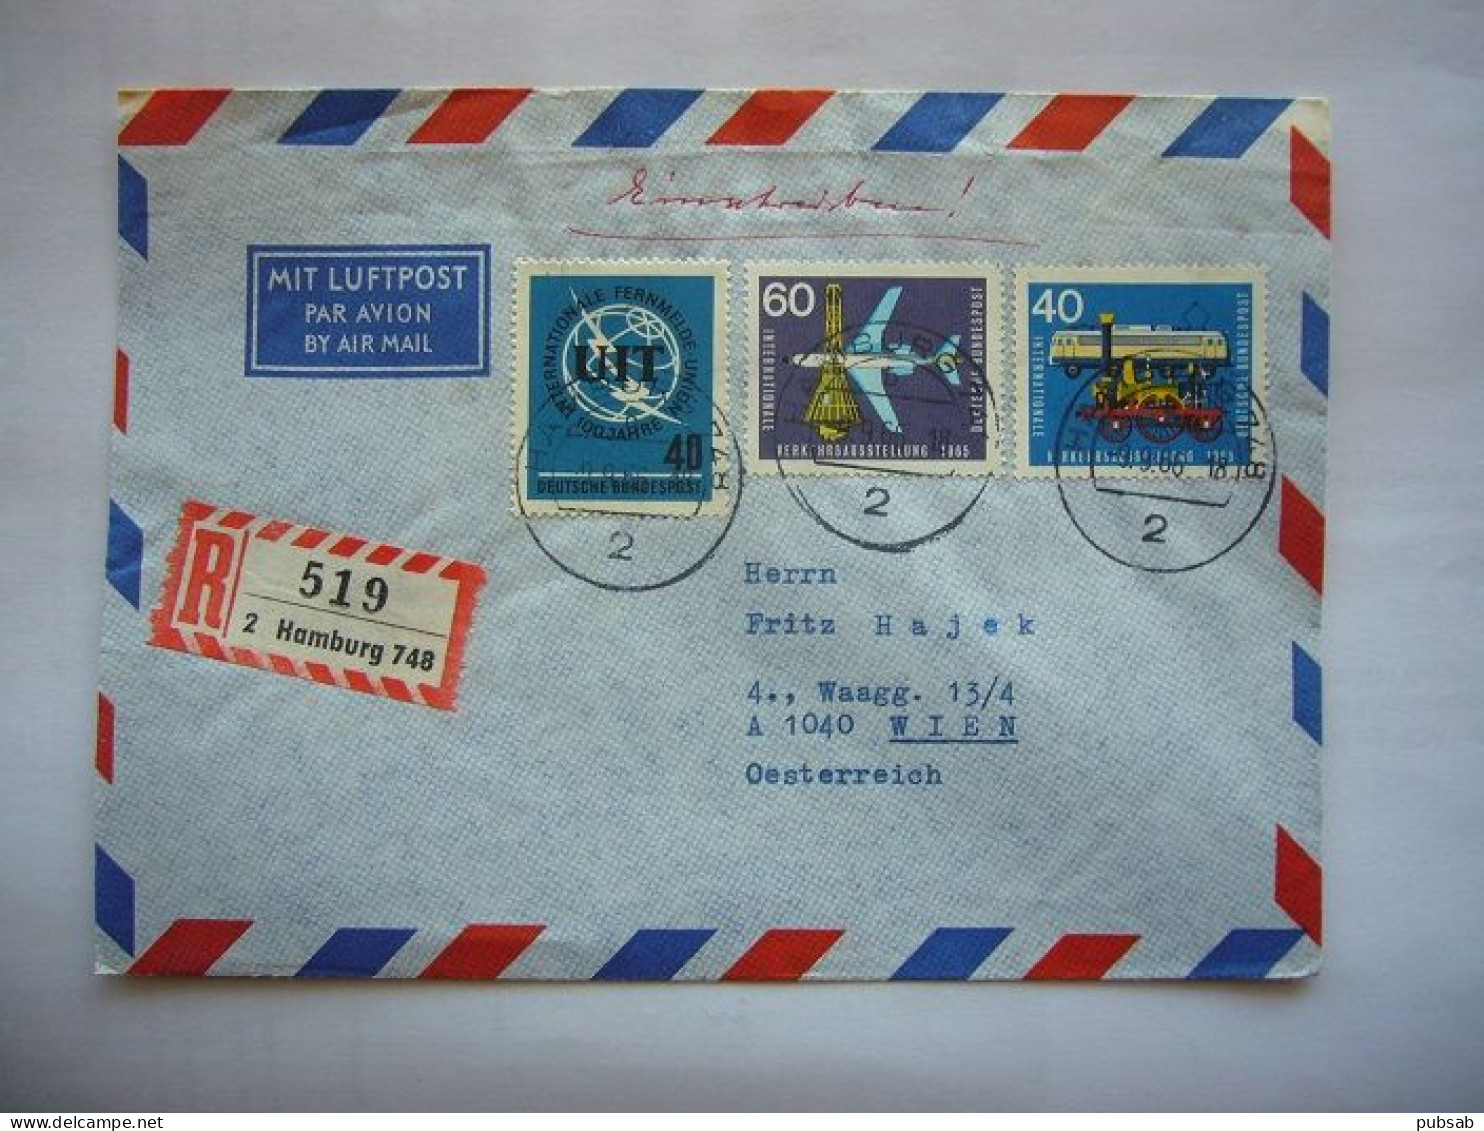 Avion / Airplane / Registered Mail From Hamburg To Wien / Sep 09,66 At 18h - Lettres & Documents